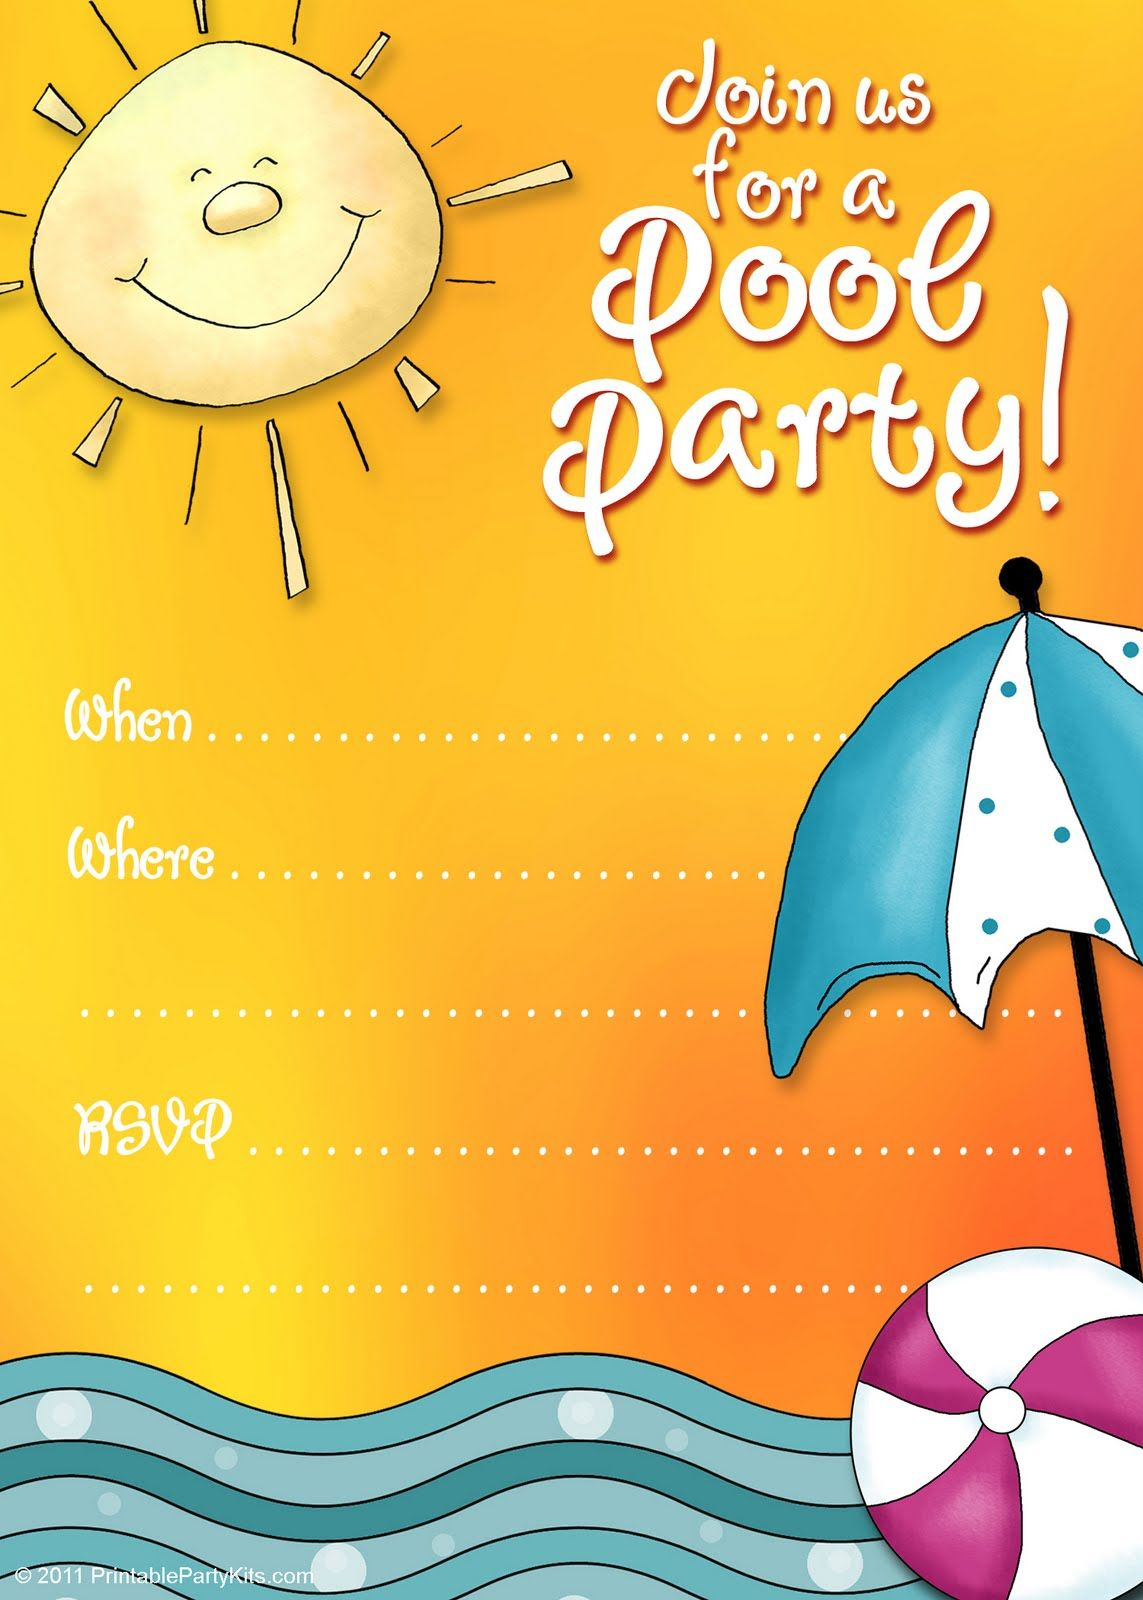 Free Printable Party Invitations: Summer Pool Party Invites - Free Printable Water Park Birthday Invitations